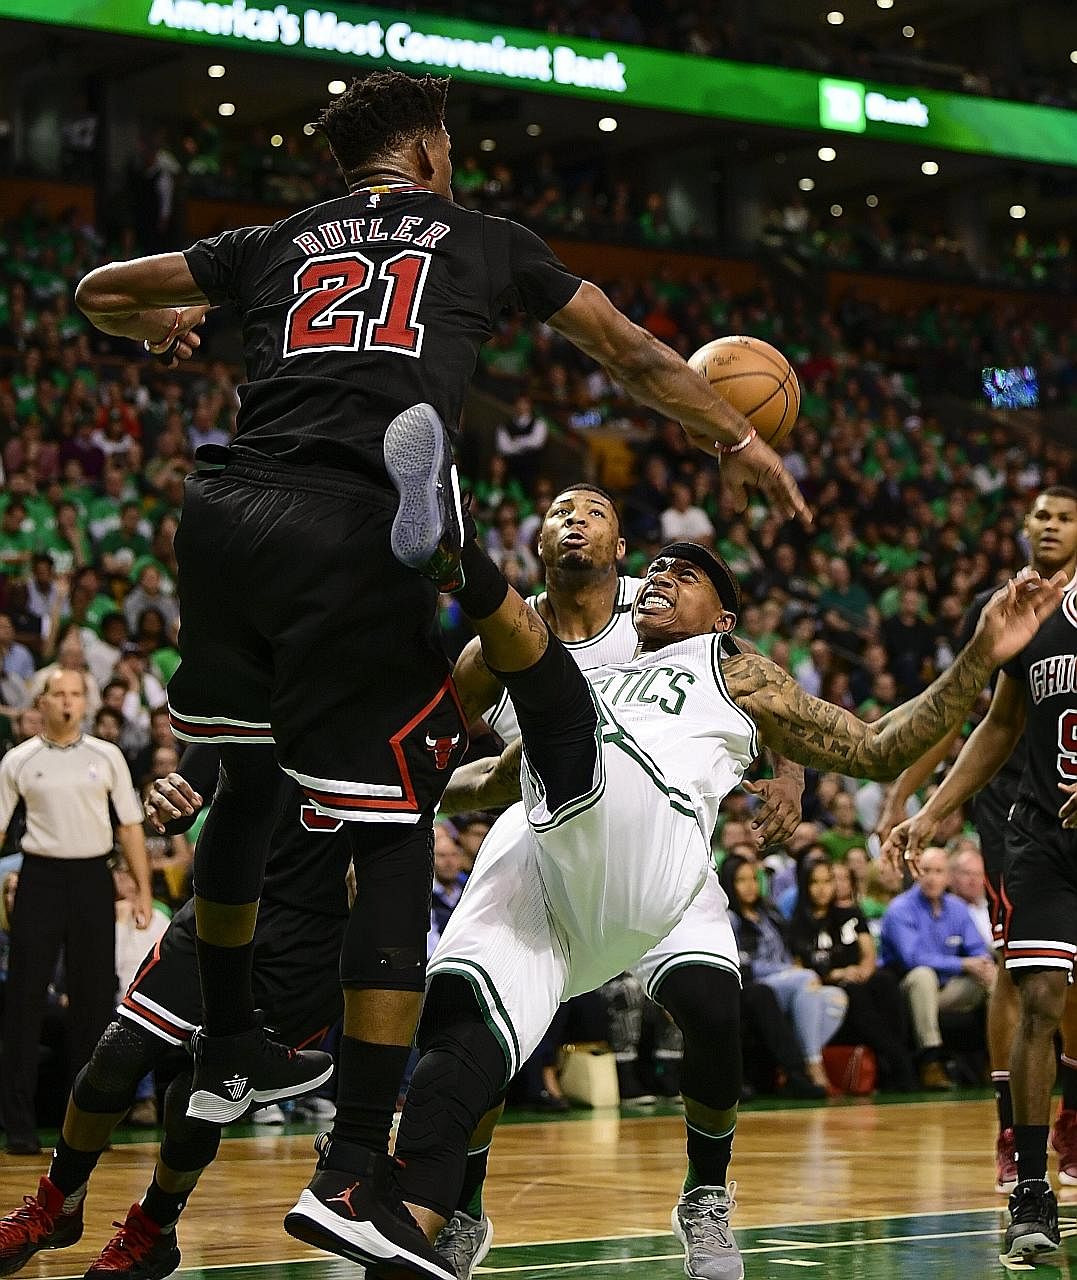 Bulls forward Jimmy Butler blocks Celtics guard Isaiah Thomas during Chicago's 111-97 victory over top seeds Boston in Game Two of their first-round Eastern Conference series. Butler, who had 22 points, eight rebounds and four steals, said the victor